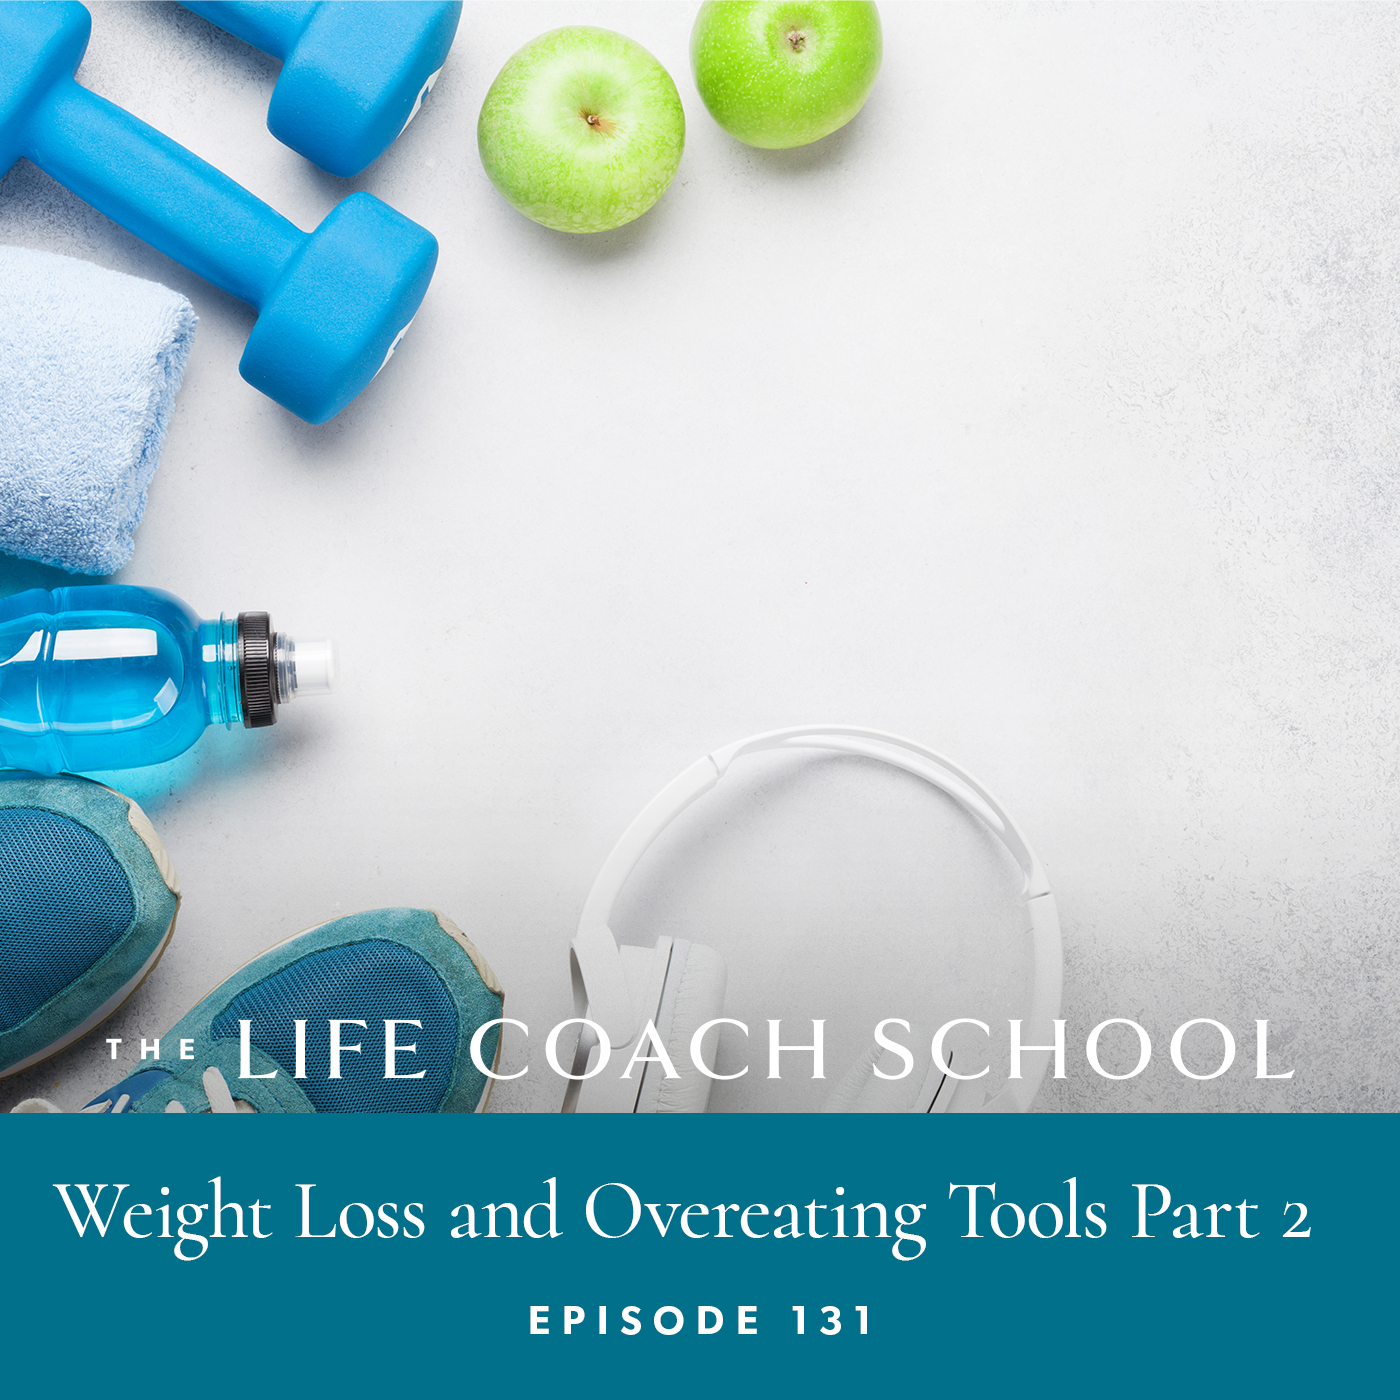 https://thelifecoachschool.com/wp-content/uploads/2016/09/the_life_coach_school_podcast_131.jpg